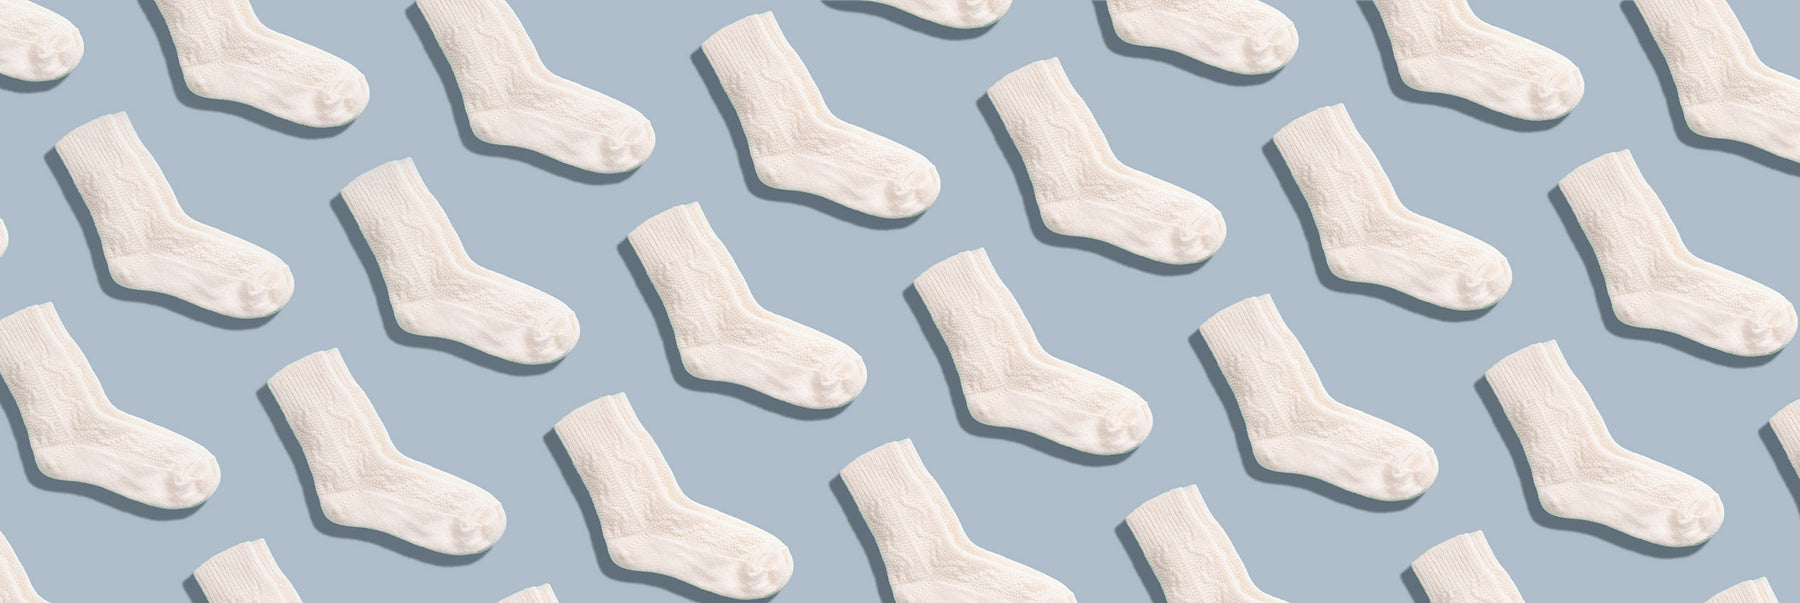 Wholesale socks are a game-changer for homeless shelters and charities